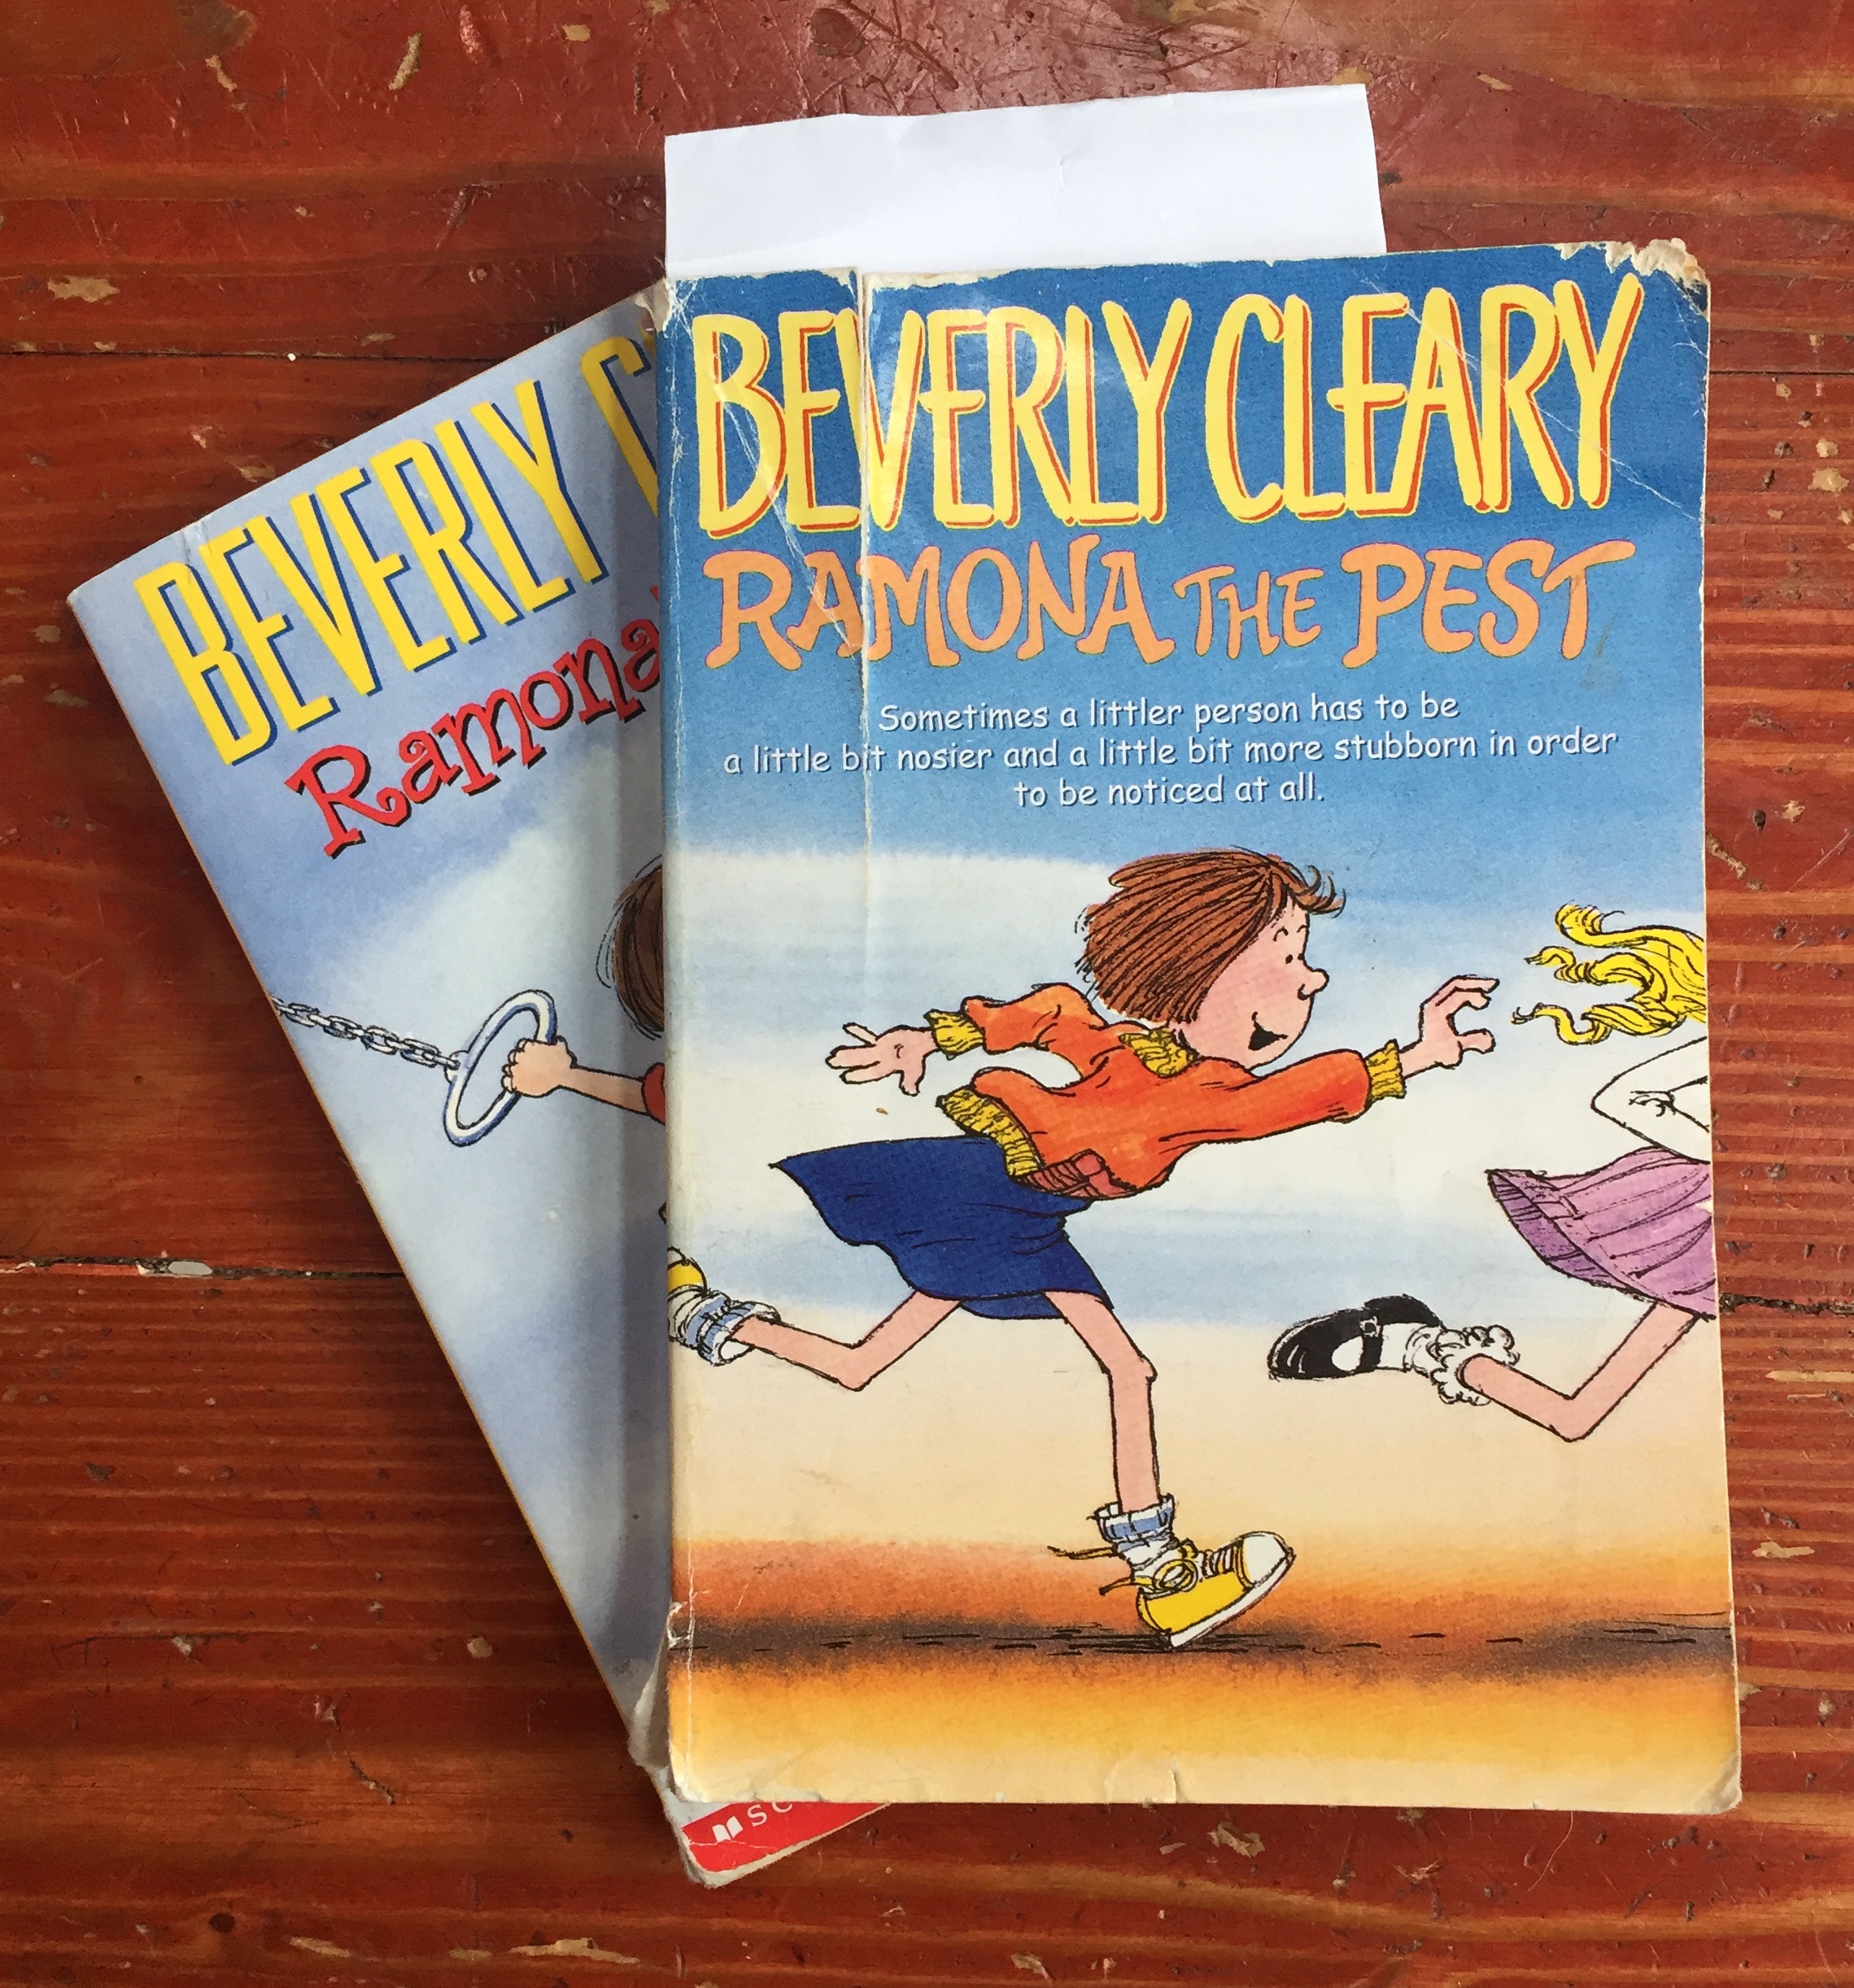 Ramona the Pest and Ramona's World by Beverly Clearly chapter books for kisd